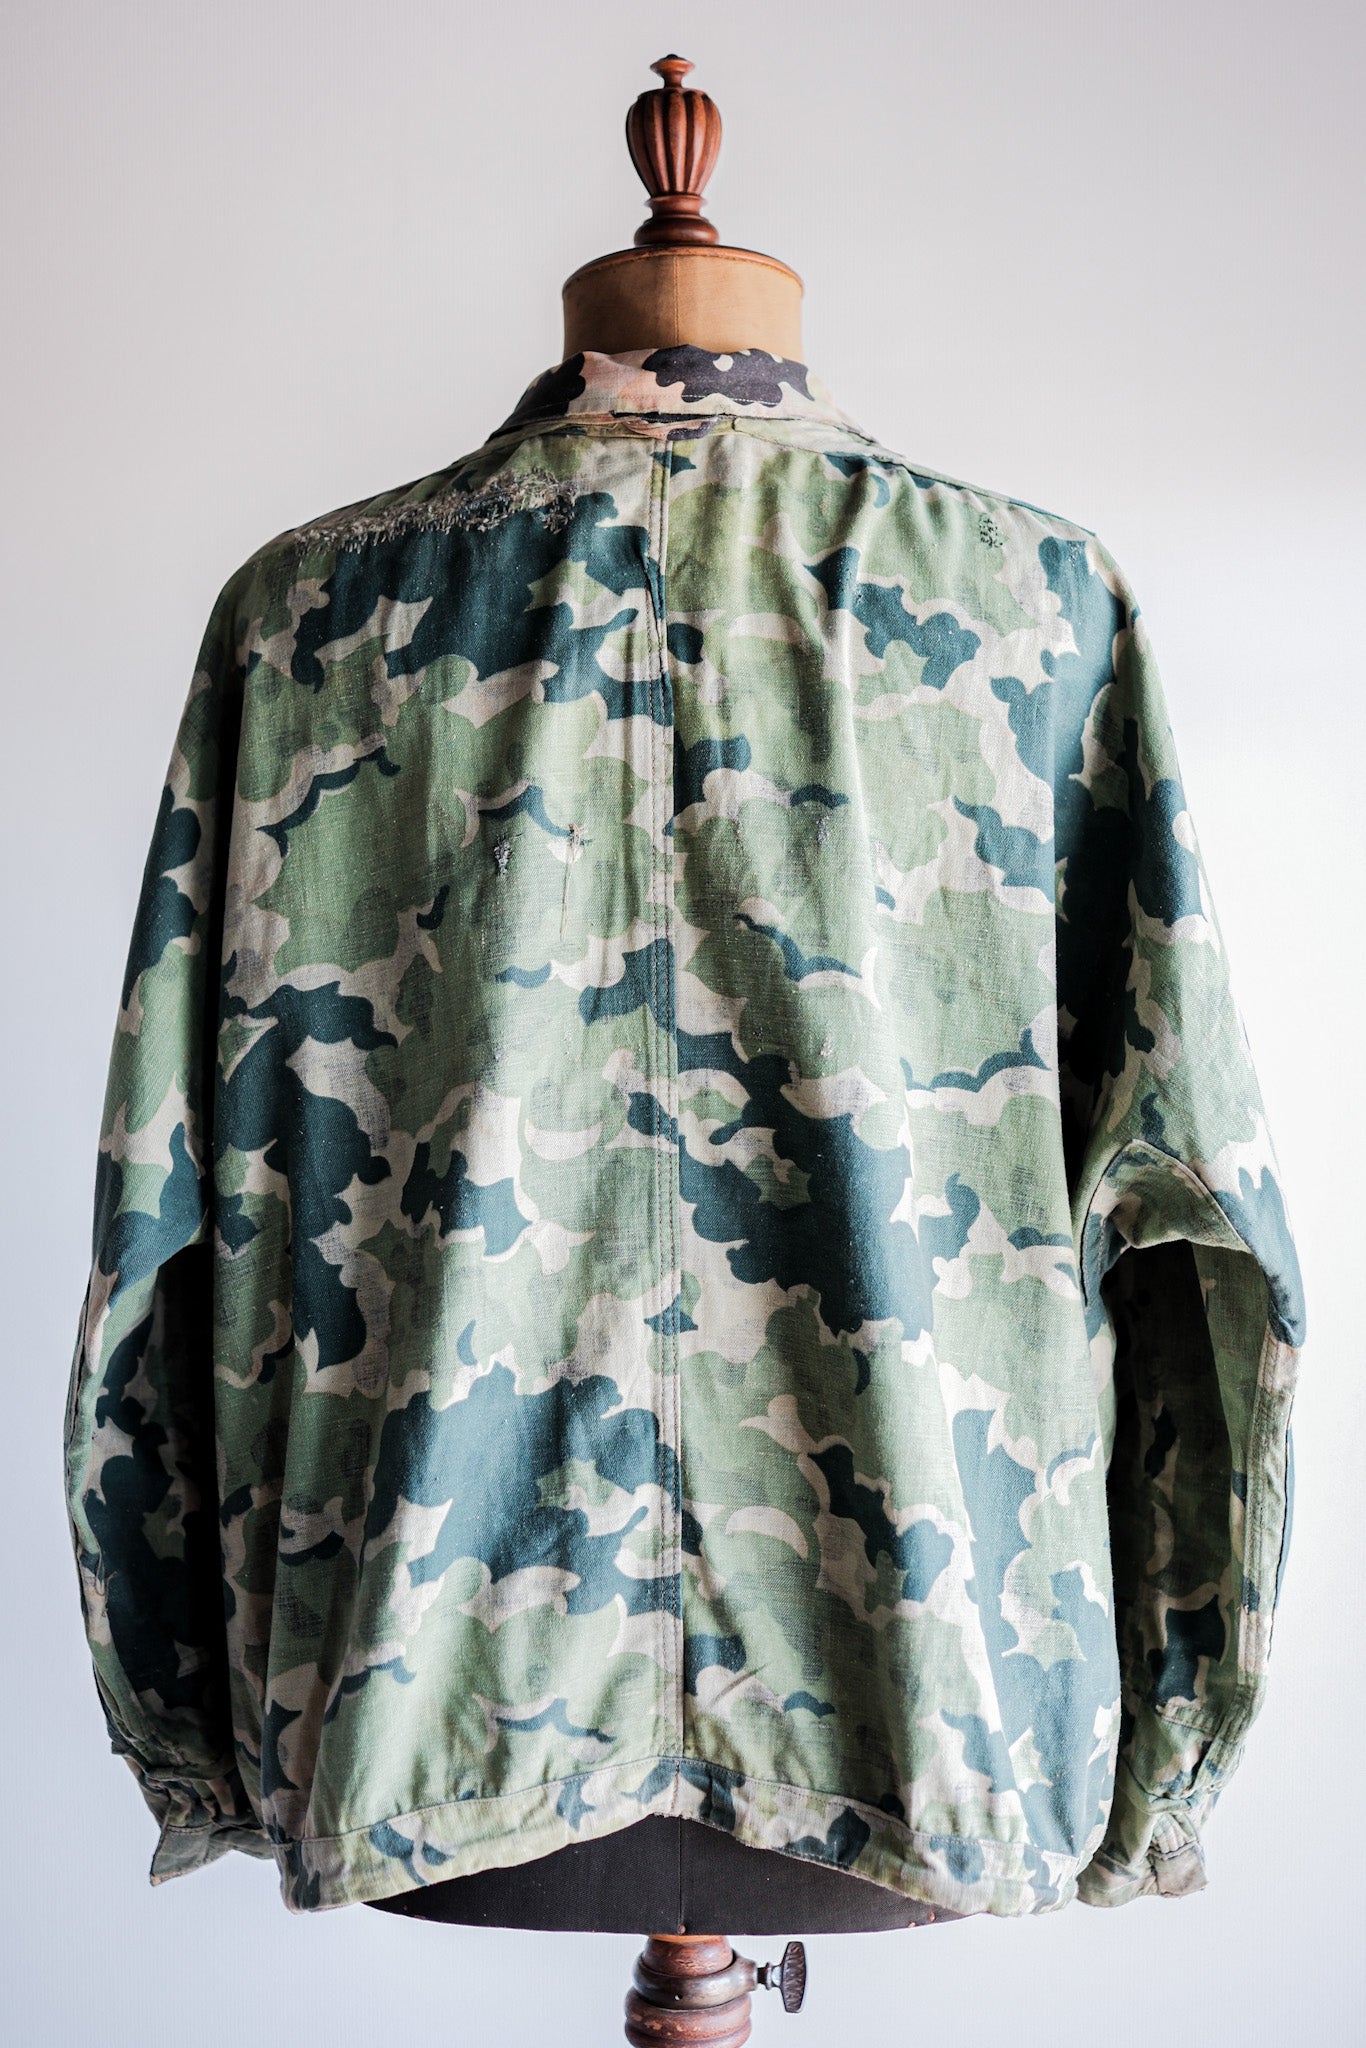 Olive Green Camouflage Distressed Jacket at Maria Vincent Boutique